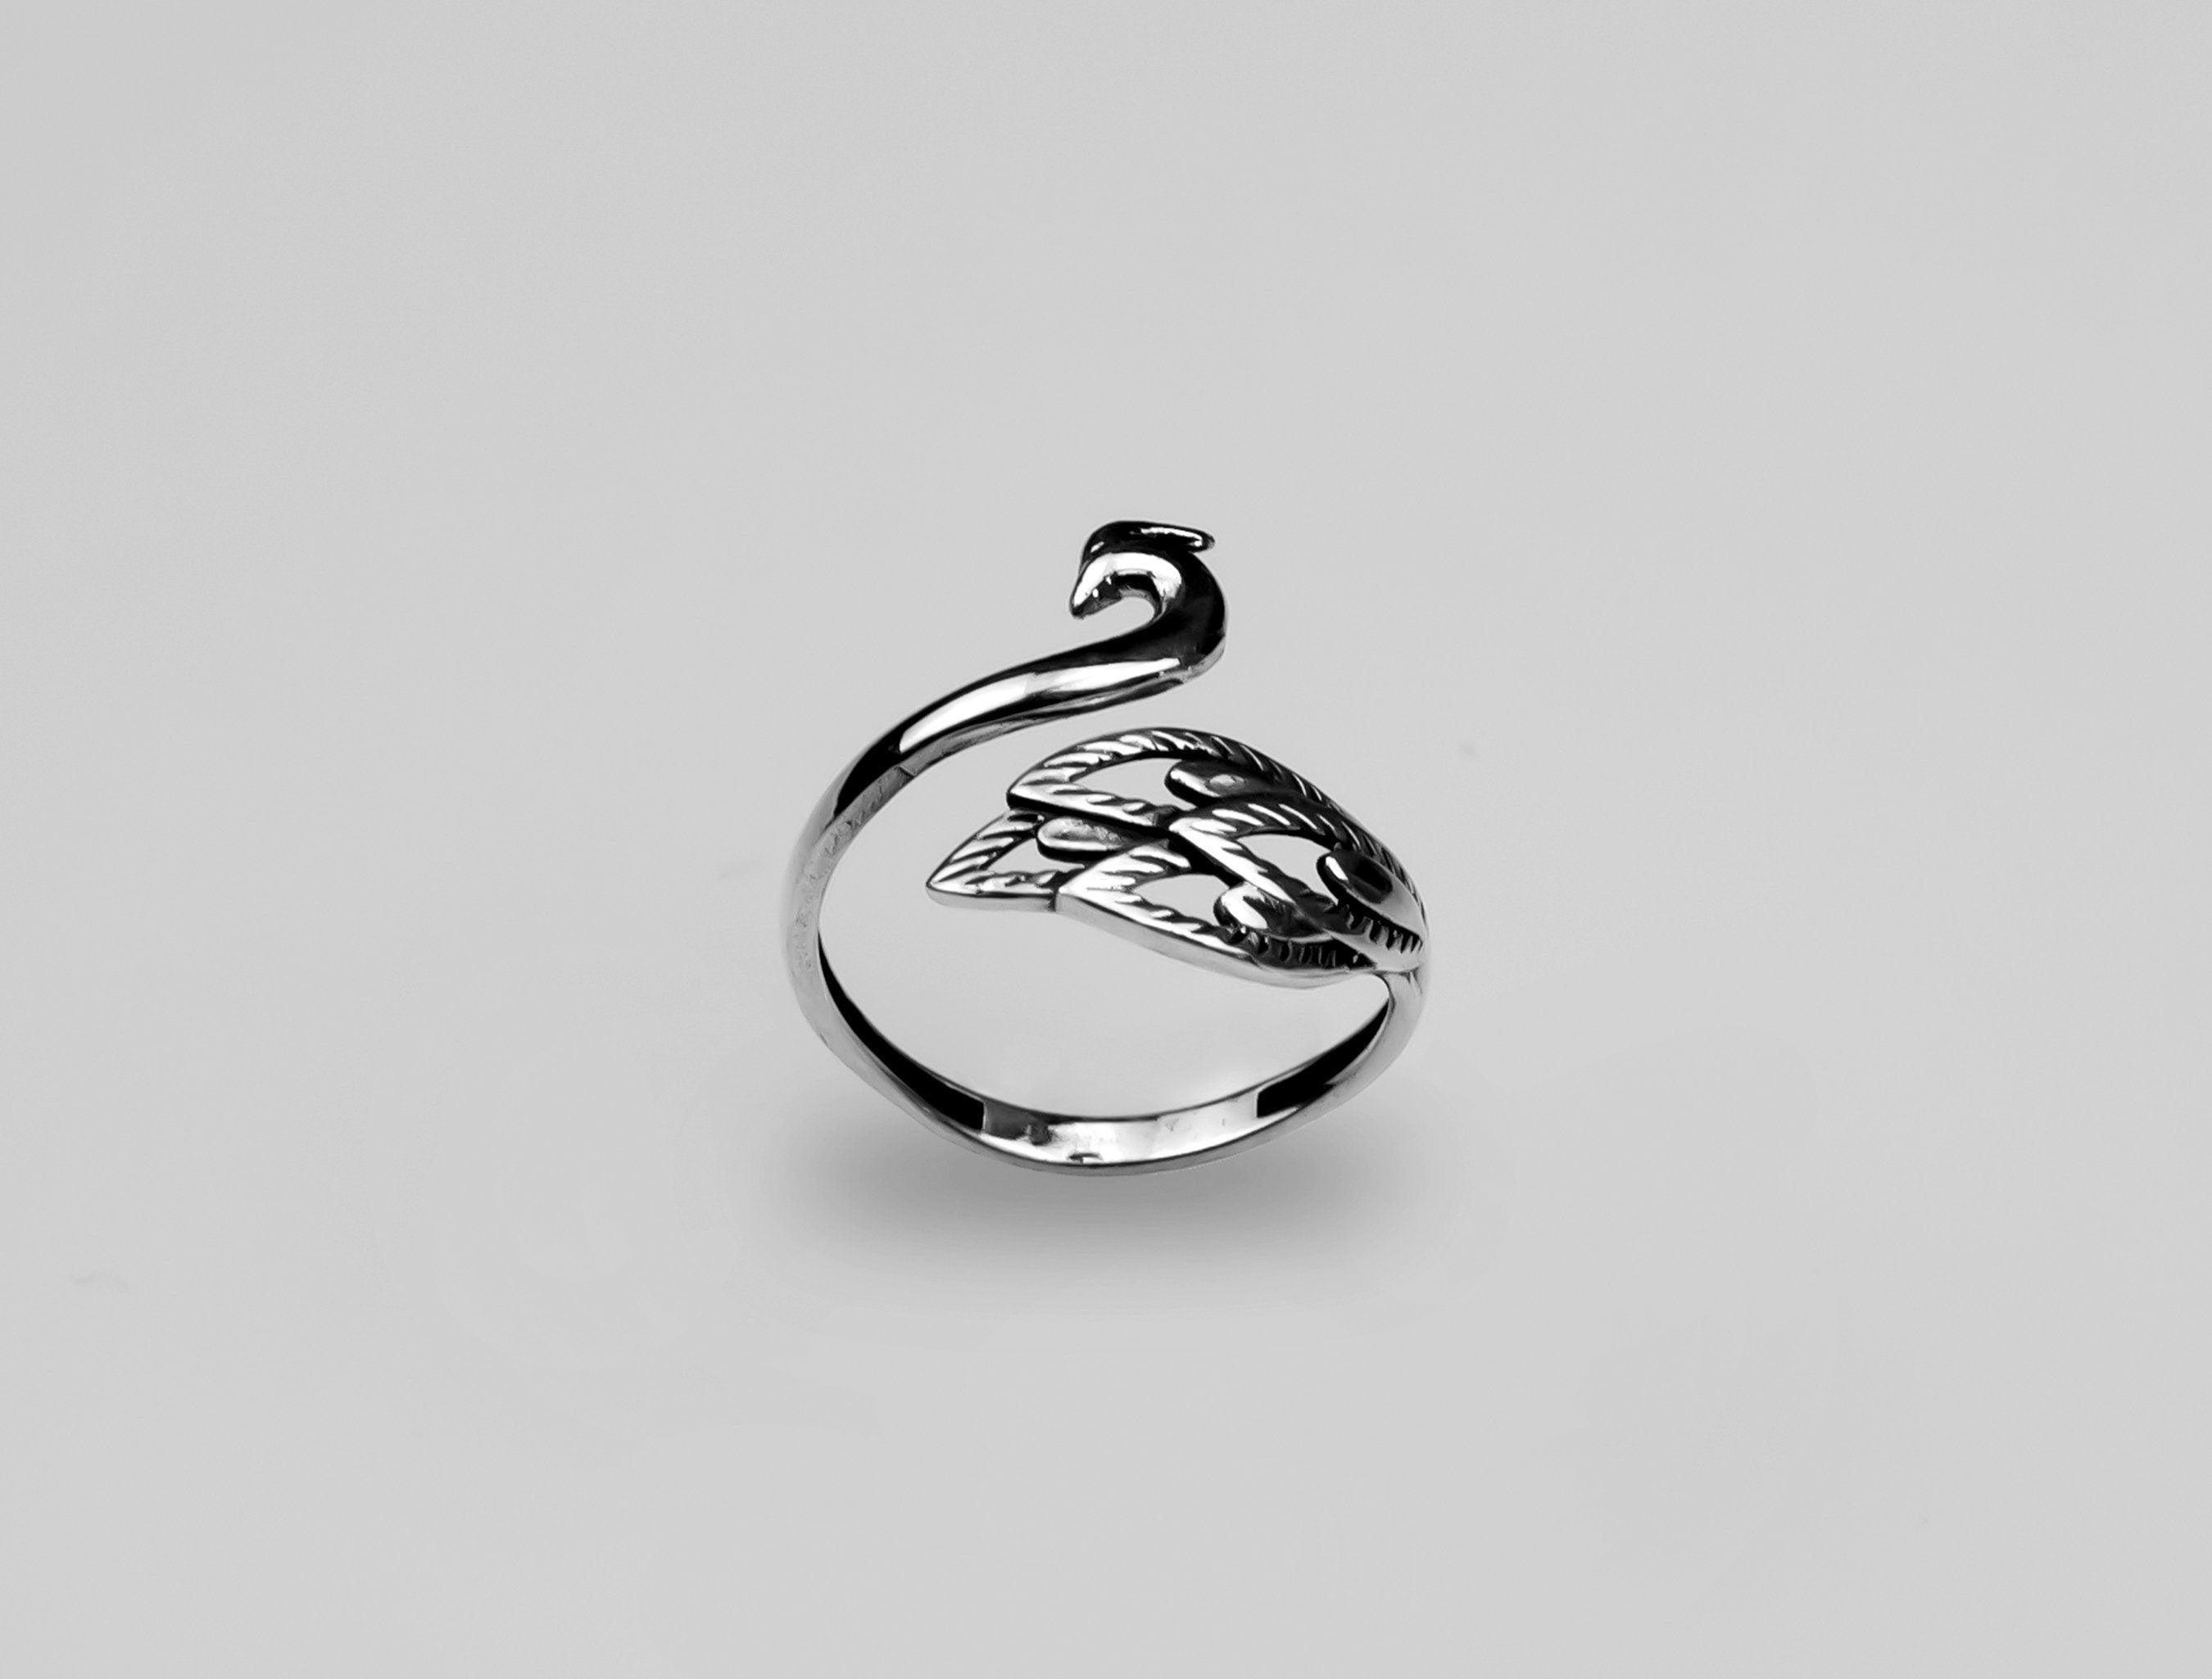 Exquisite Silver Arrow Ring, Boho Silver Ring, Adjustable Silver Ring, Best Gift for Women, Sterling Silver Ring, Silver Ring with Feather available at Moyoni Design